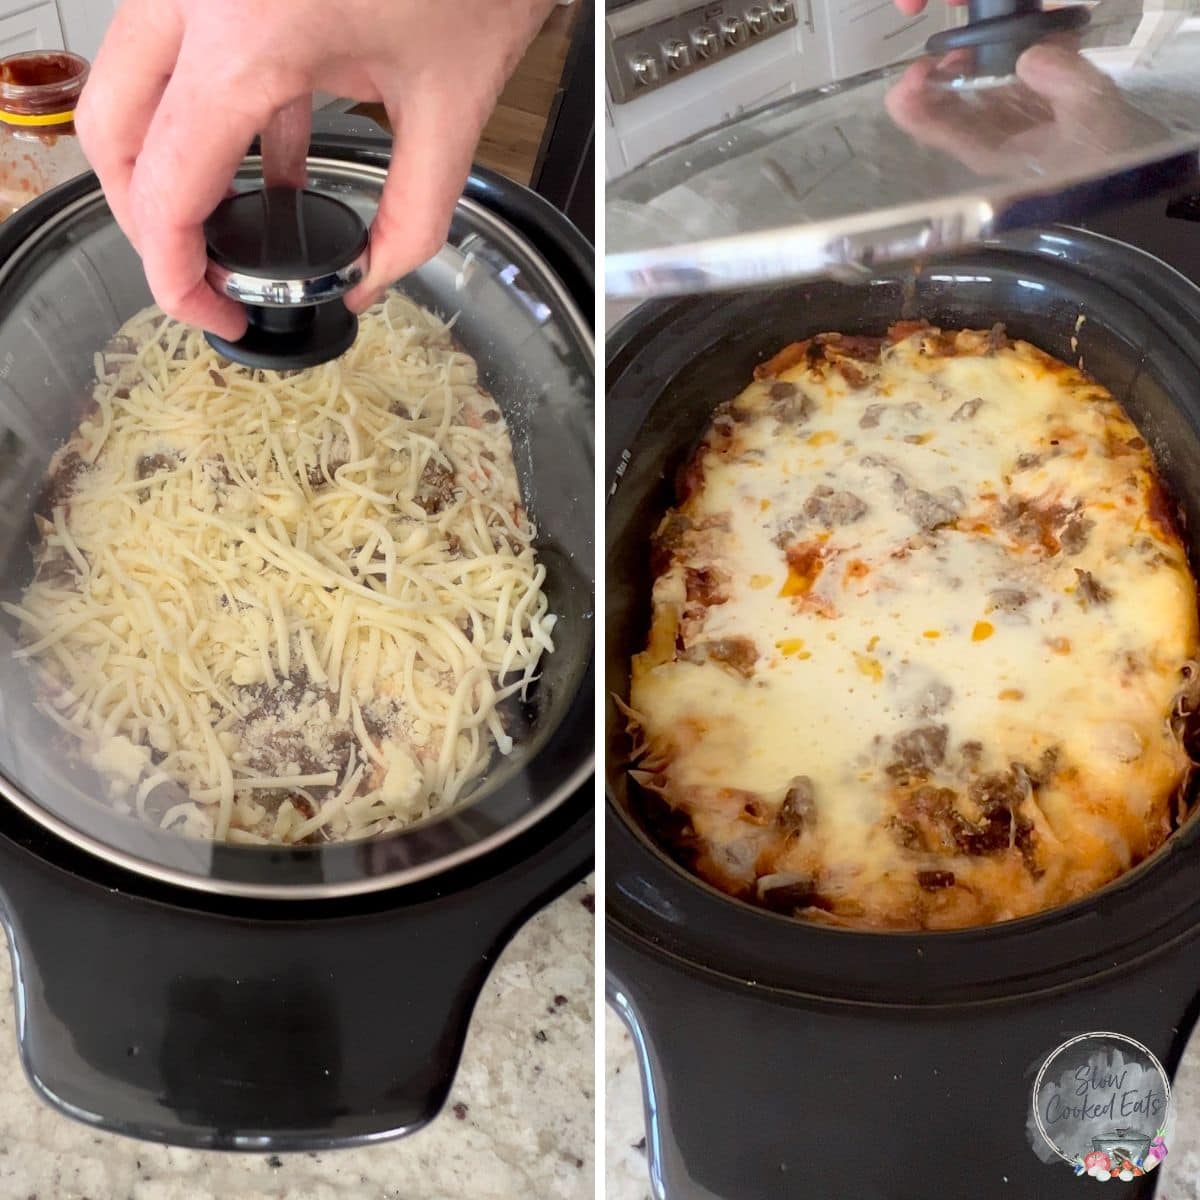 Removing the lid from the baked ziti in crock pot. 